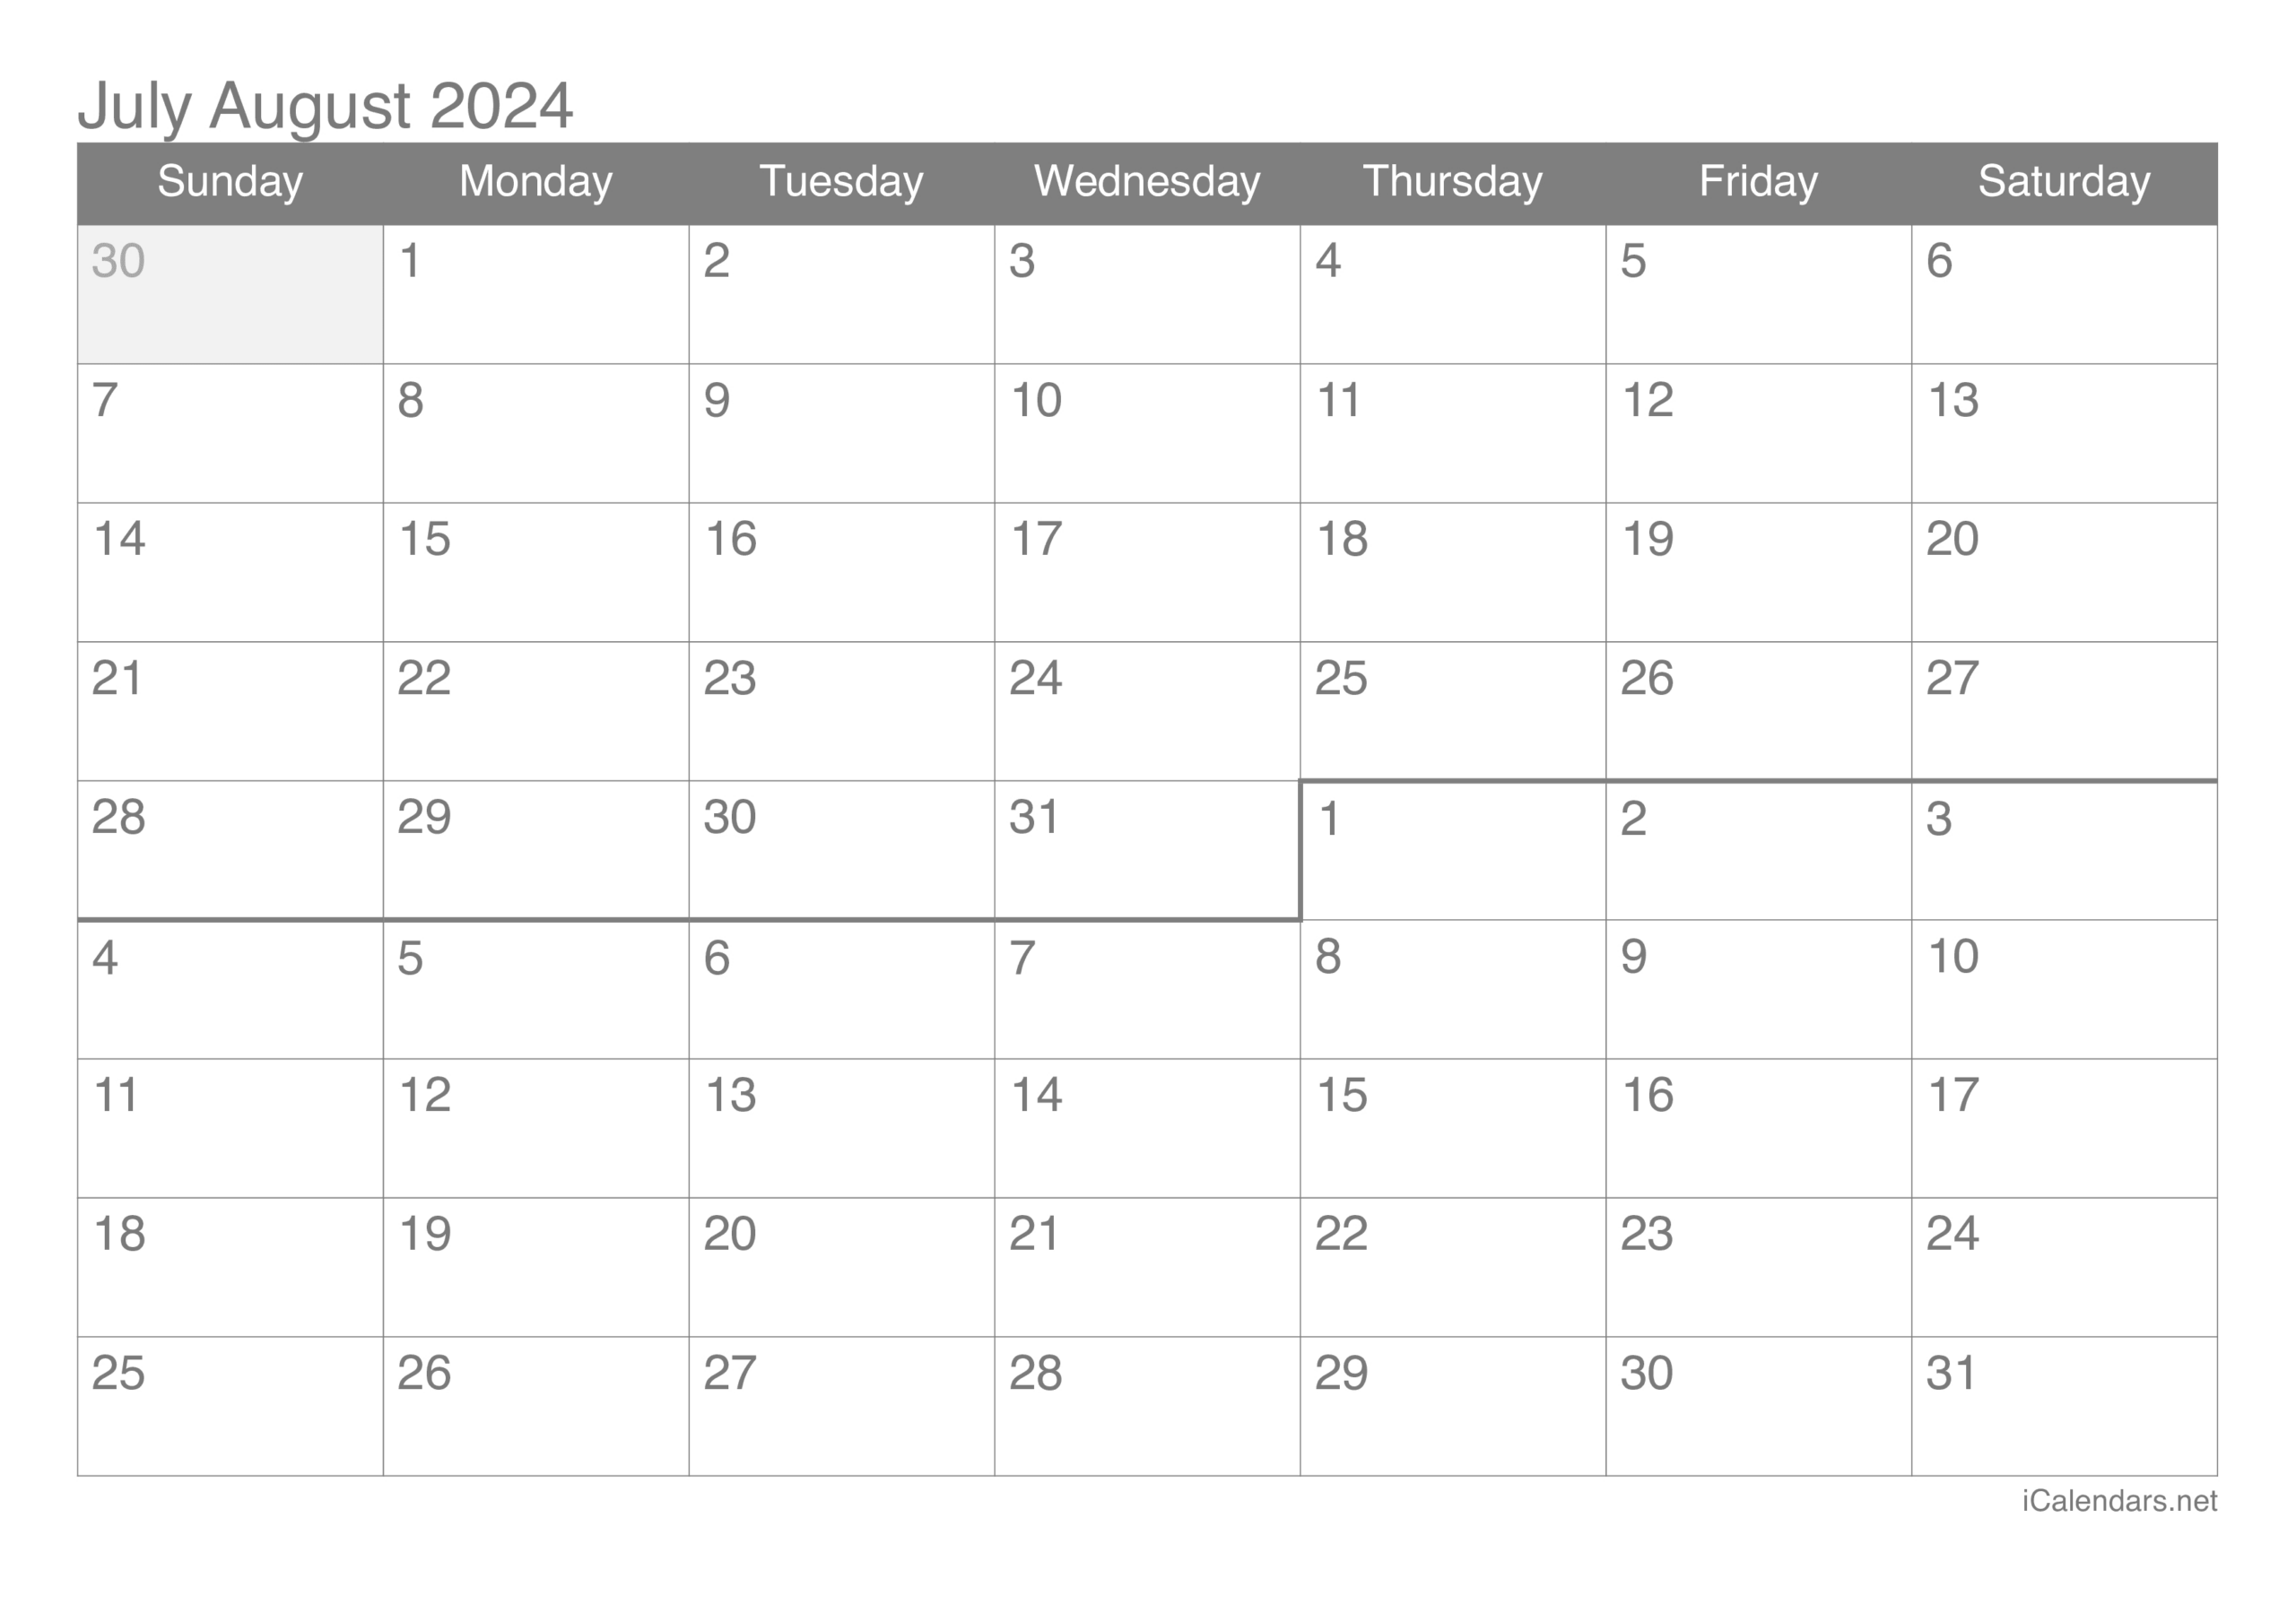 July And August 2024 Printable Calendar pertaining to July and August Calendar 2024 Printable